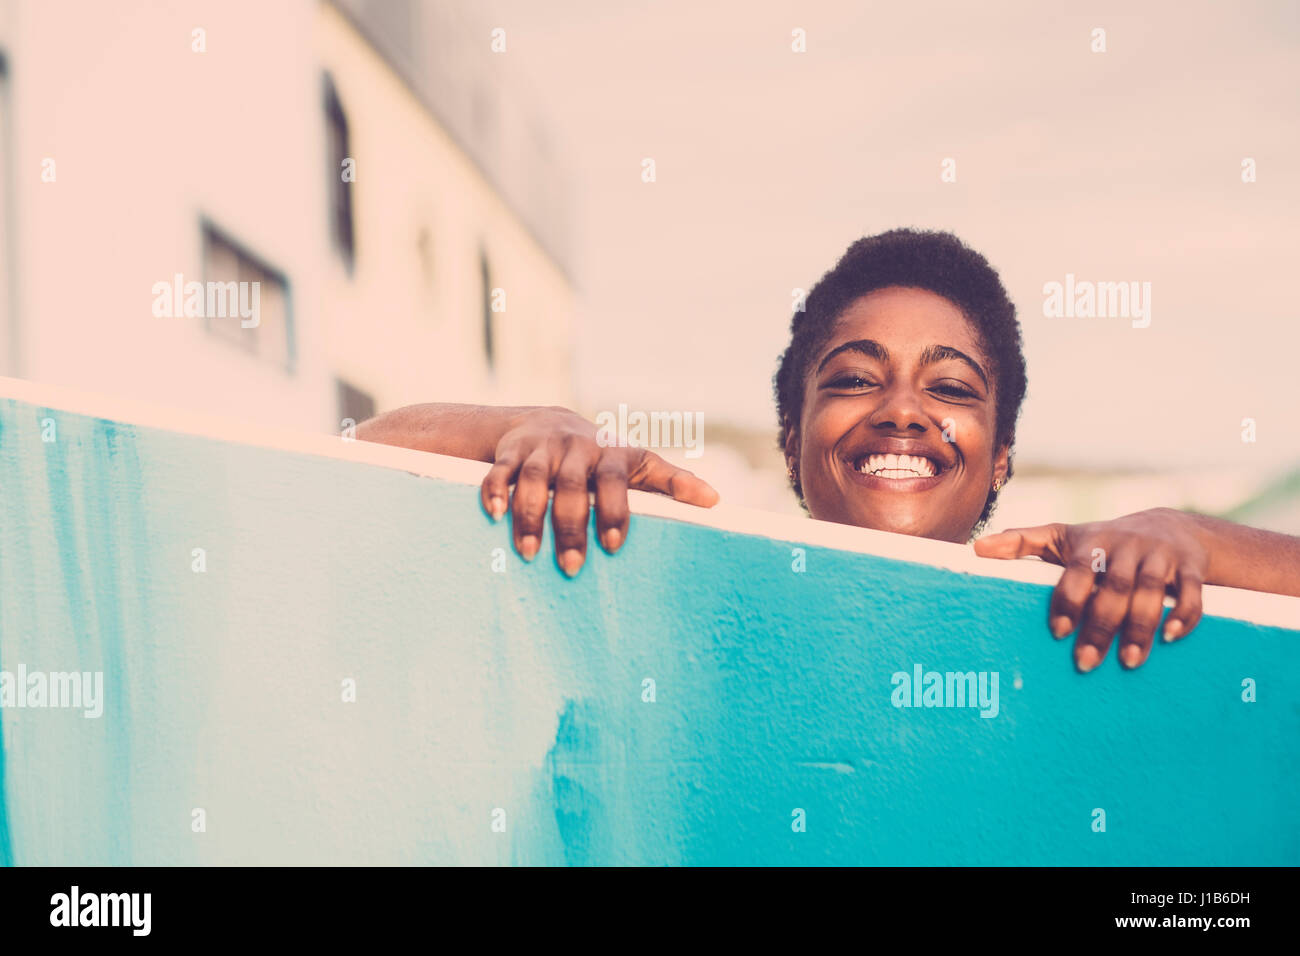 Smiling African American woman peering over blue wall Stock Photo